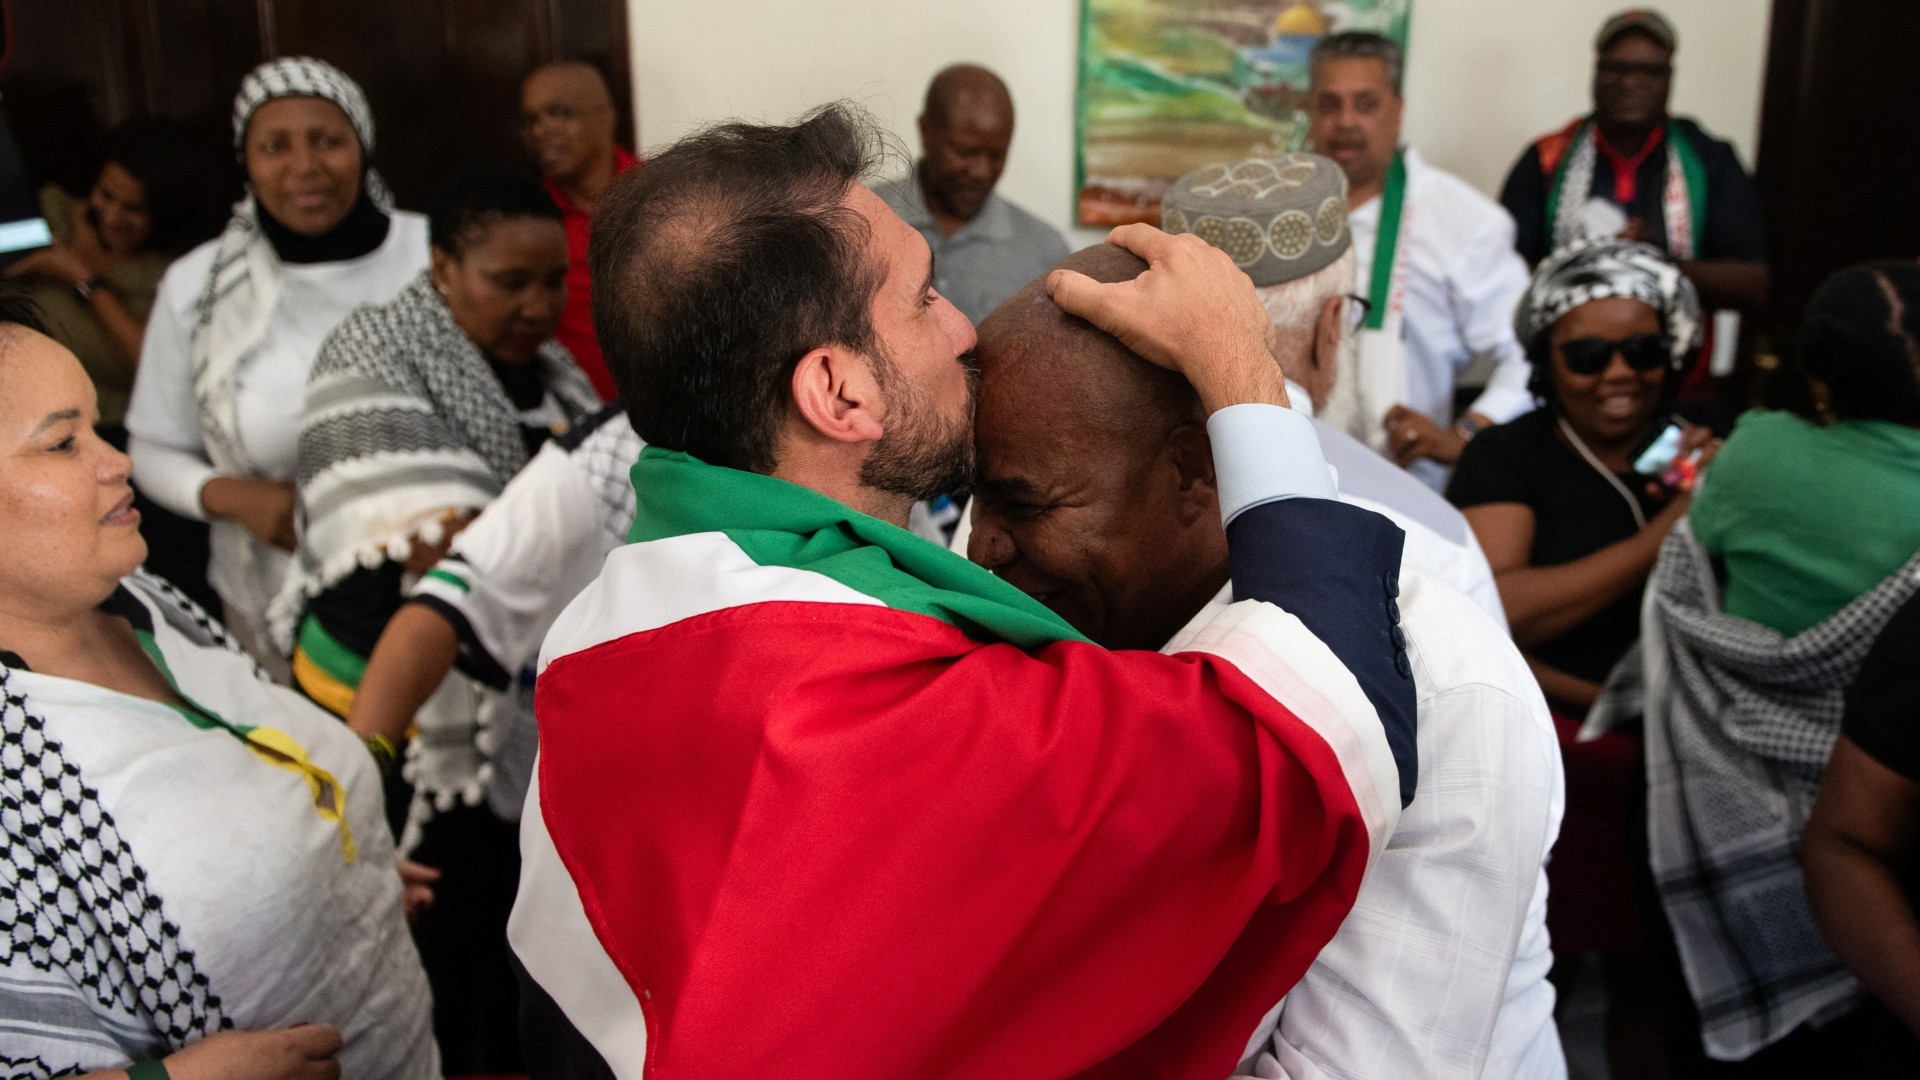 Pro-Palestinian supporters react after the judgement of the ICJ, at the headquarters of the Palestinian mission in Pretoria, South Africa (Reuters/Alet Pretorius)